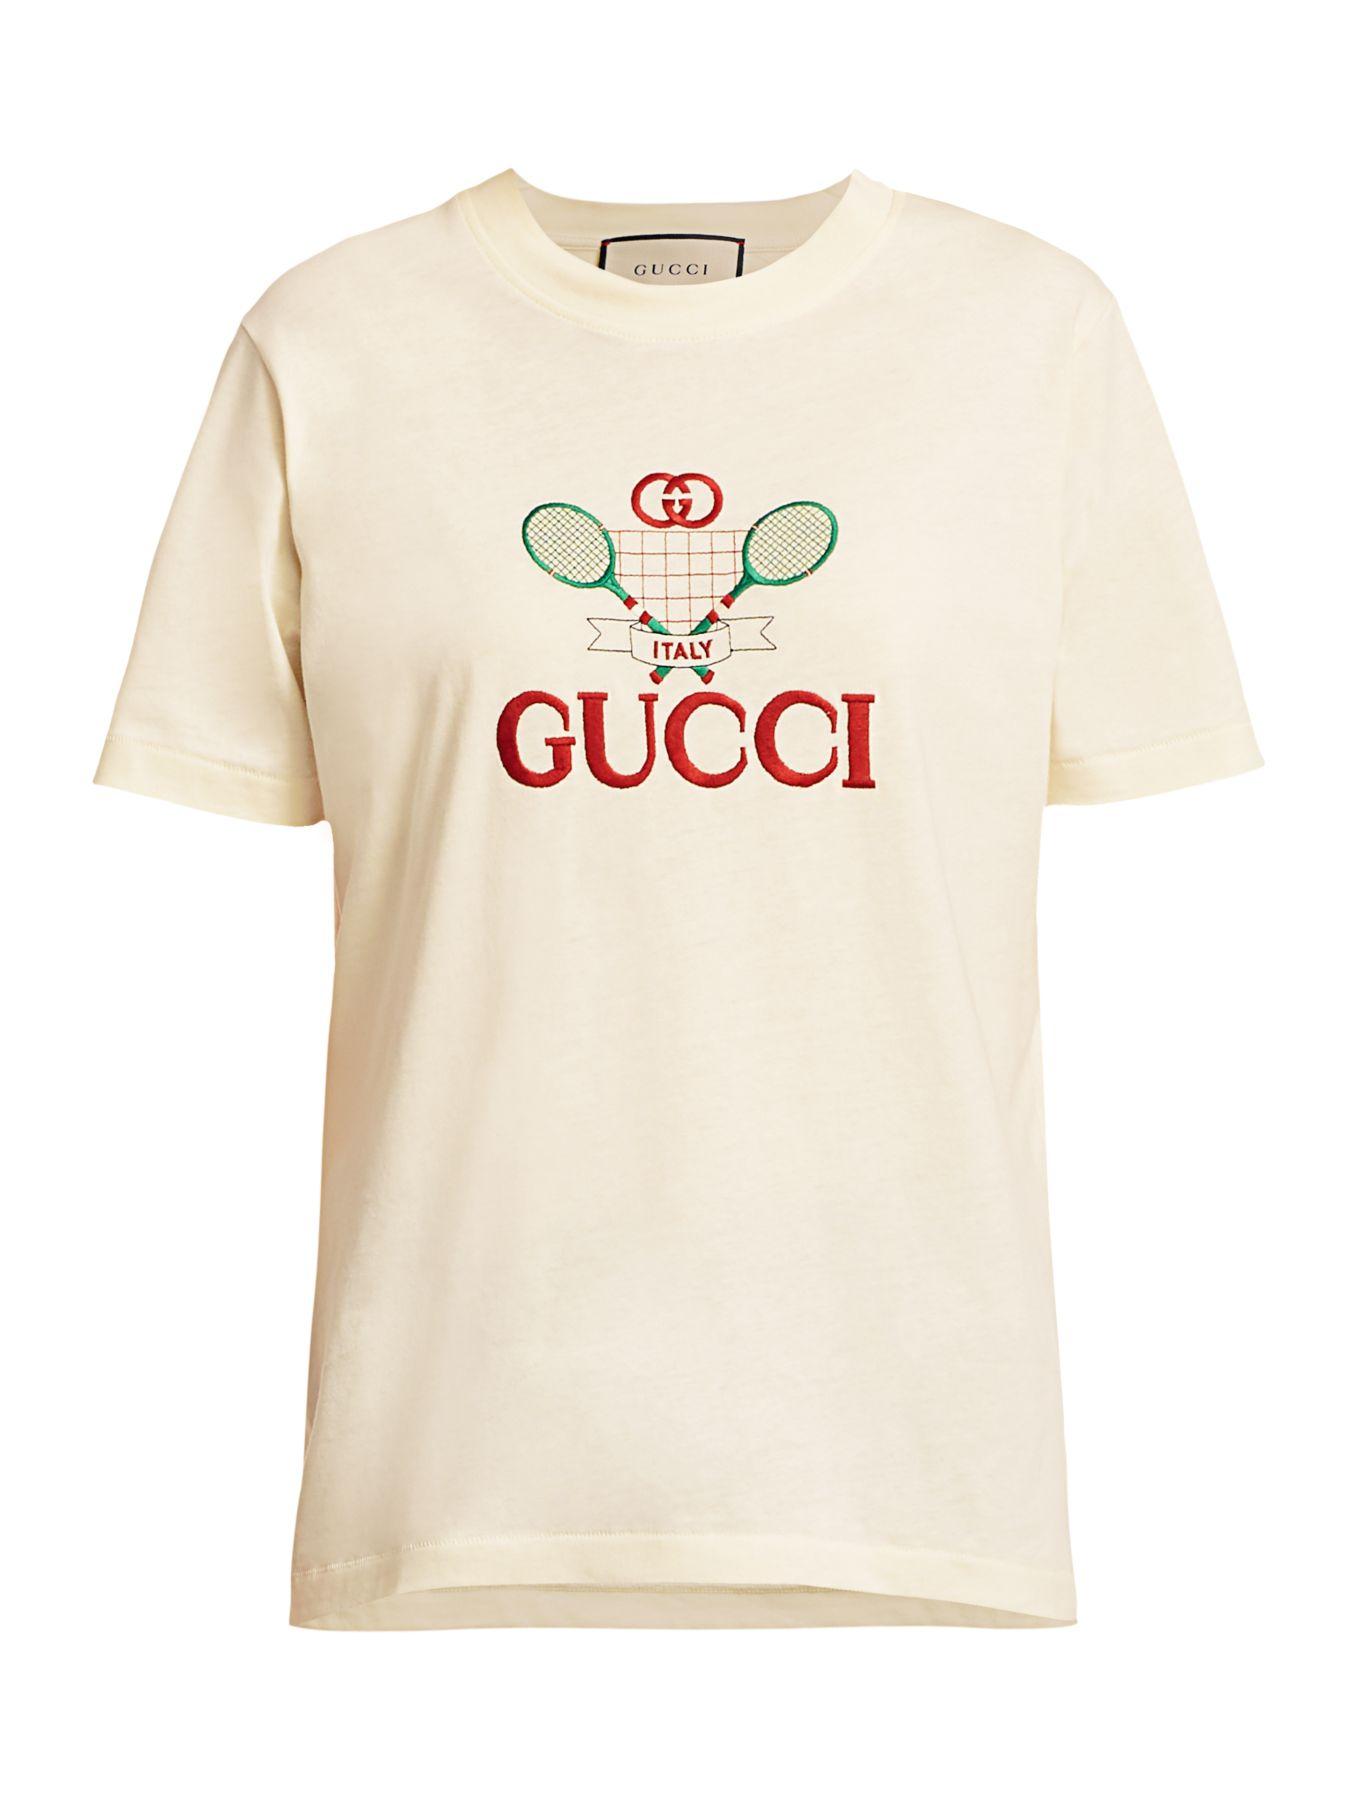 Gucci Cotton Tennis Graphic T-shirt in White Pattern (White) - Save 50% ...